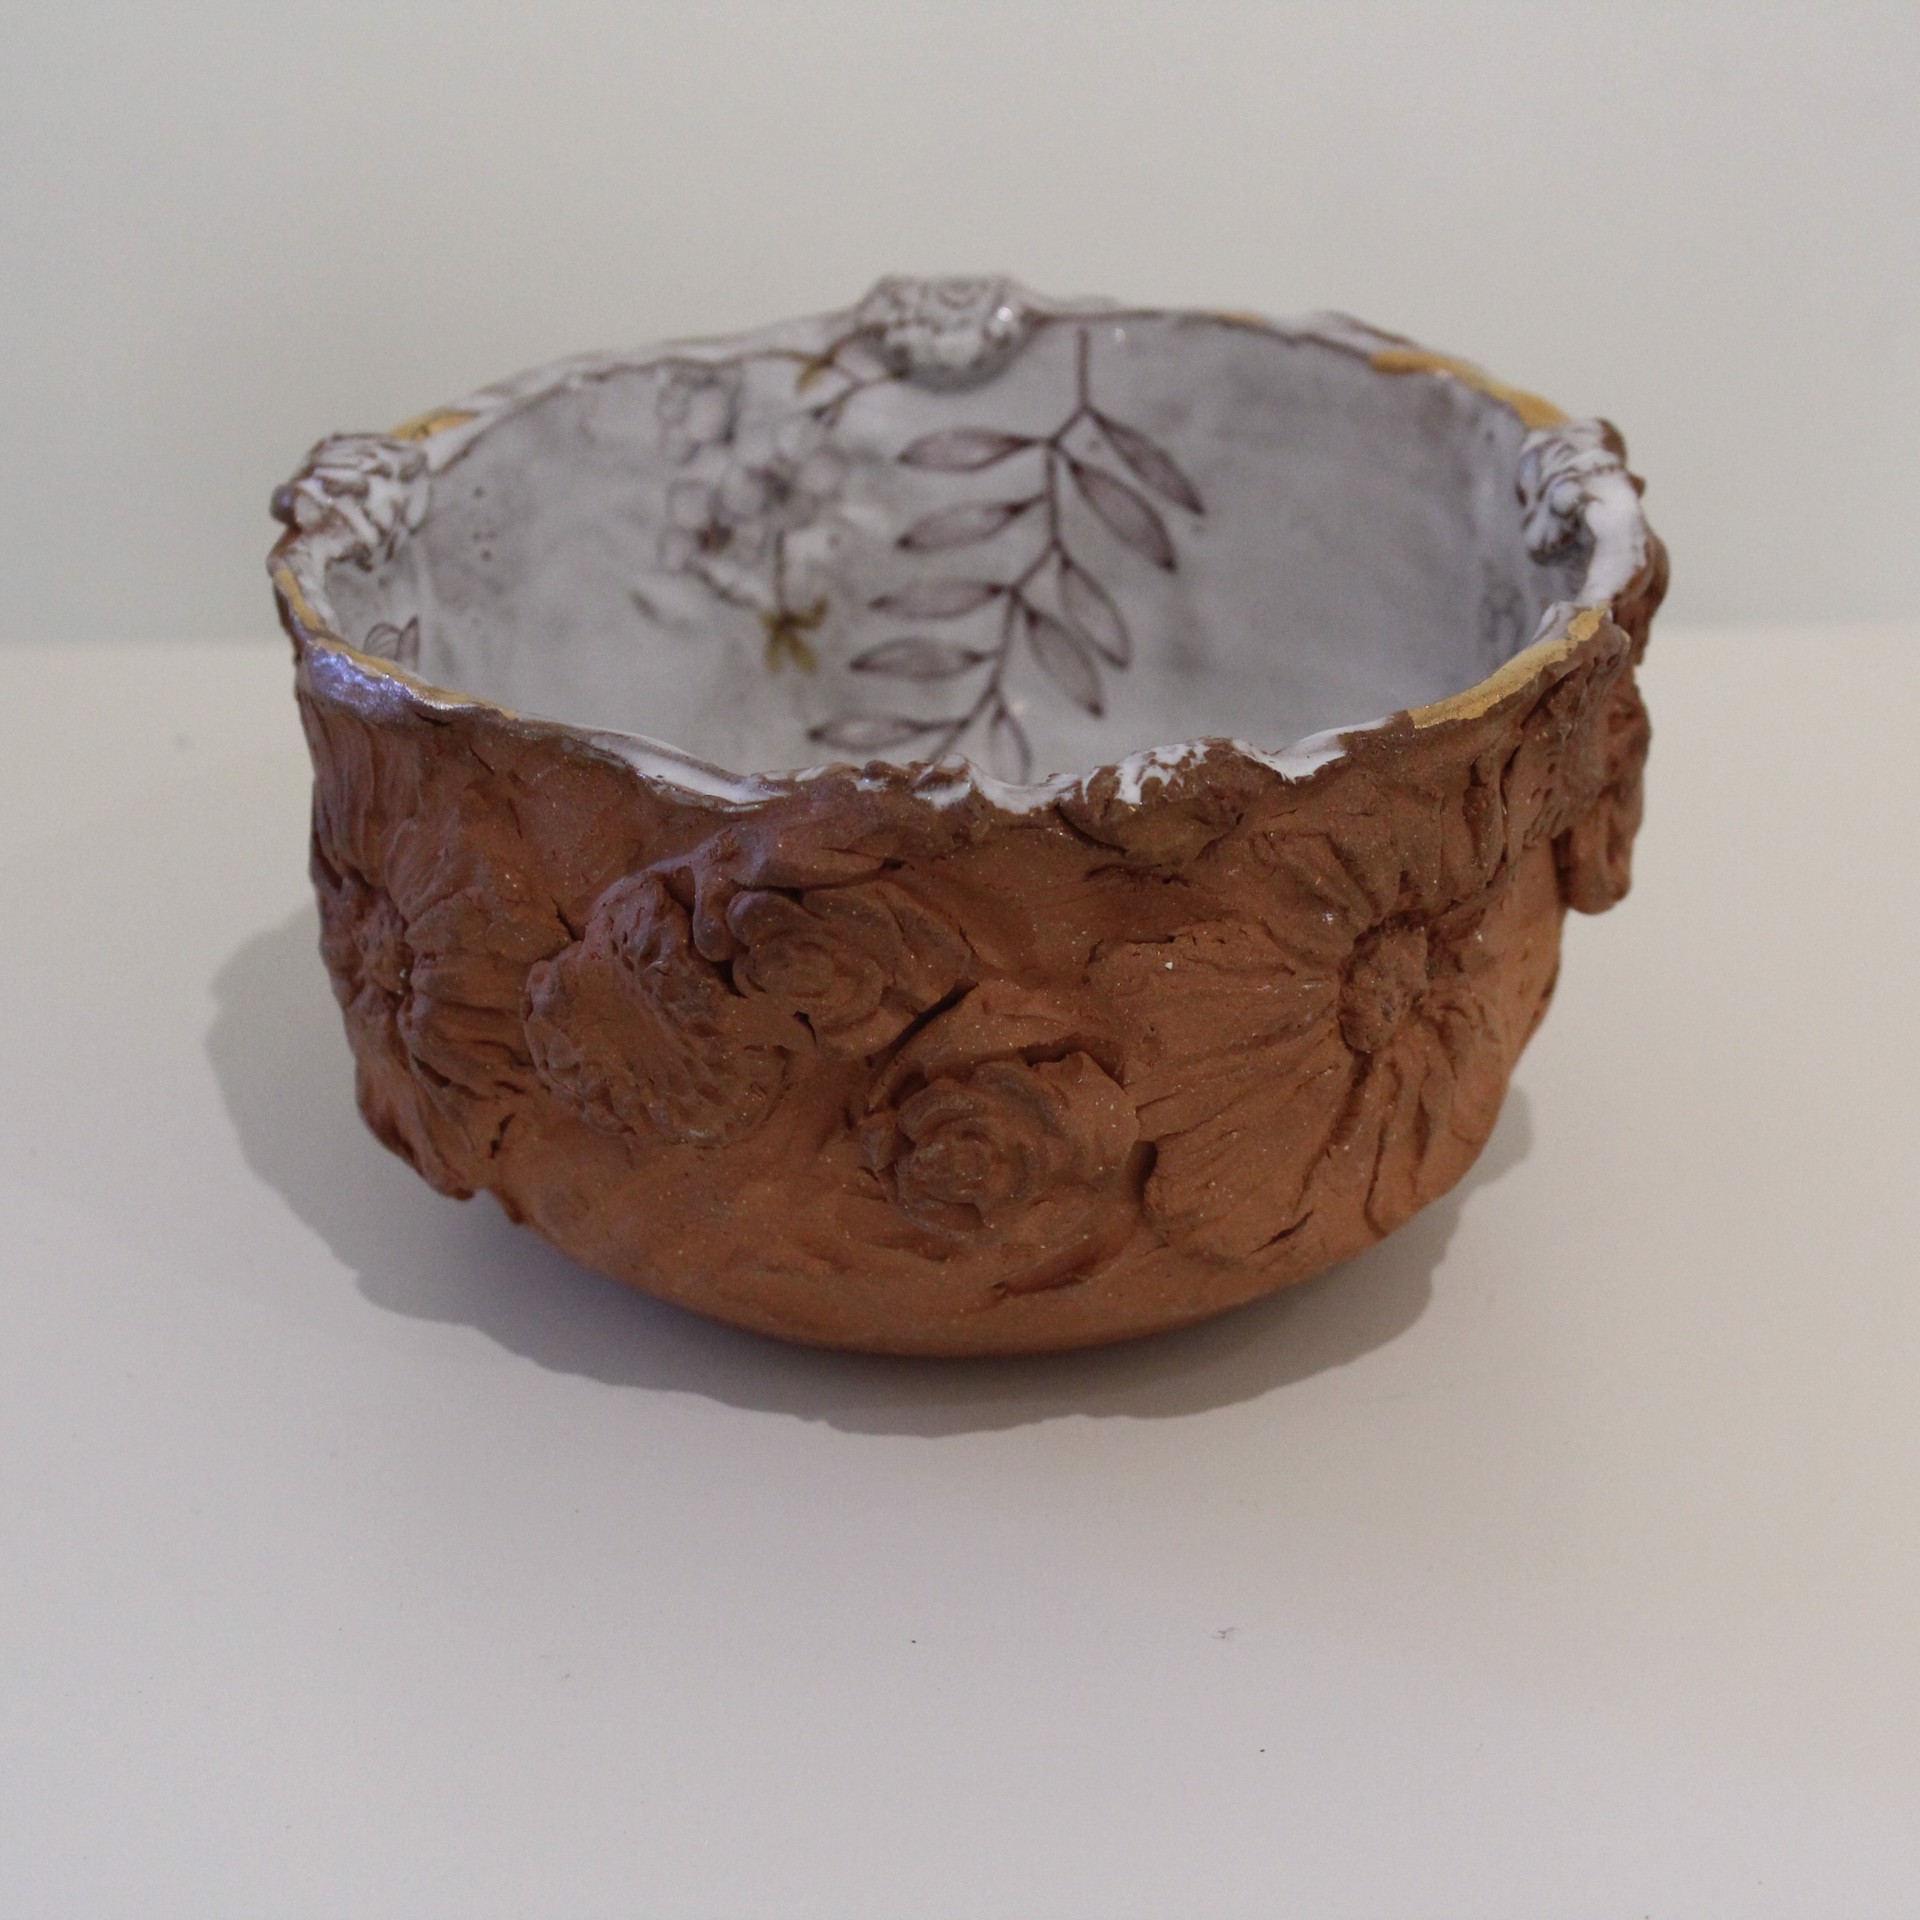 Small Carved Bowl by Therese Knowles